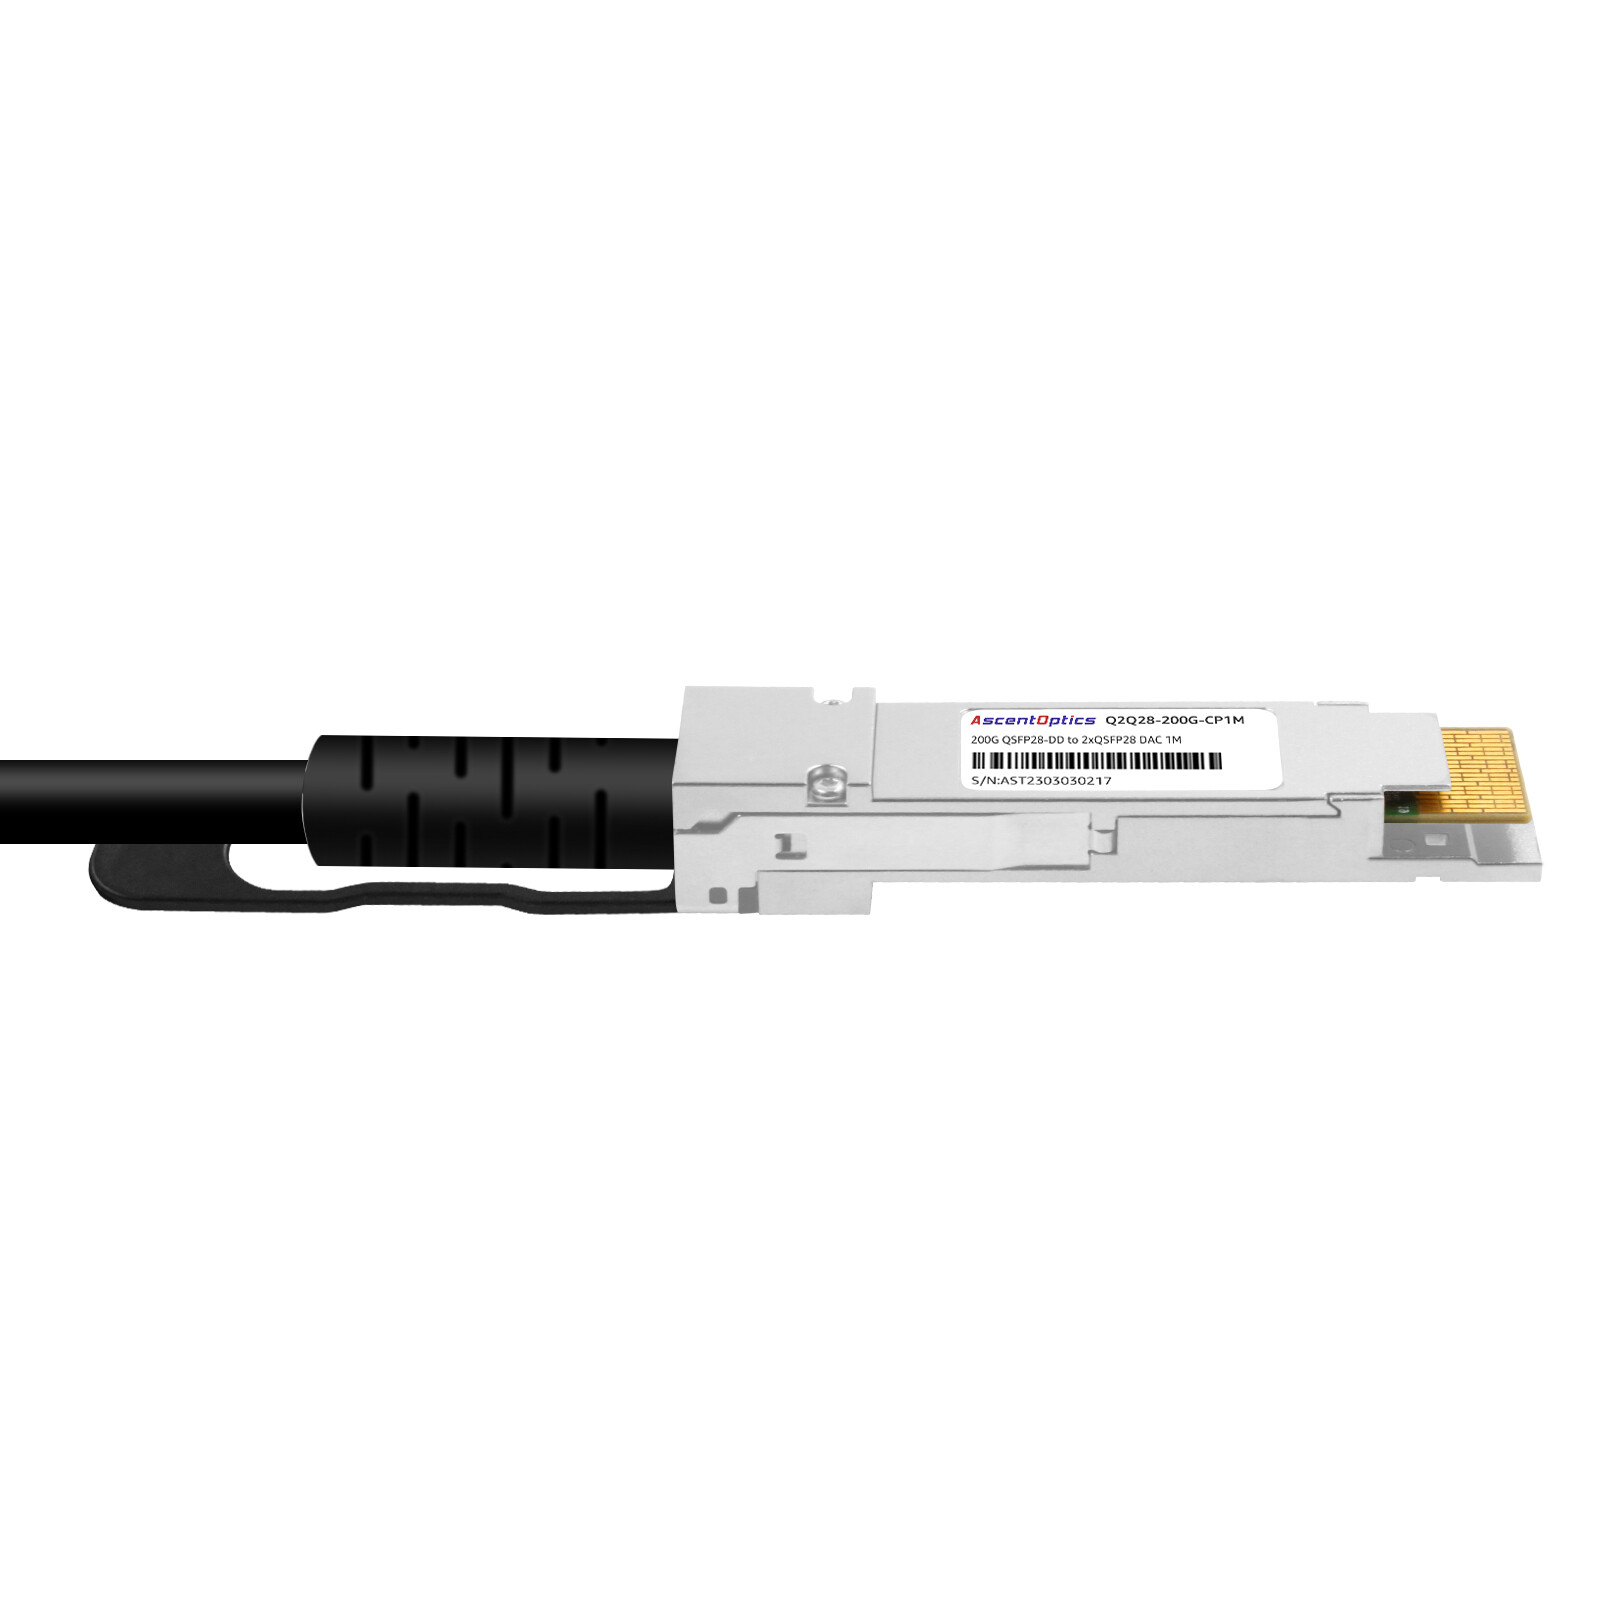 200G QSFP28-DD to 2x 100G QSFP28 Copper Breakout Cable,1 Meter,Passive